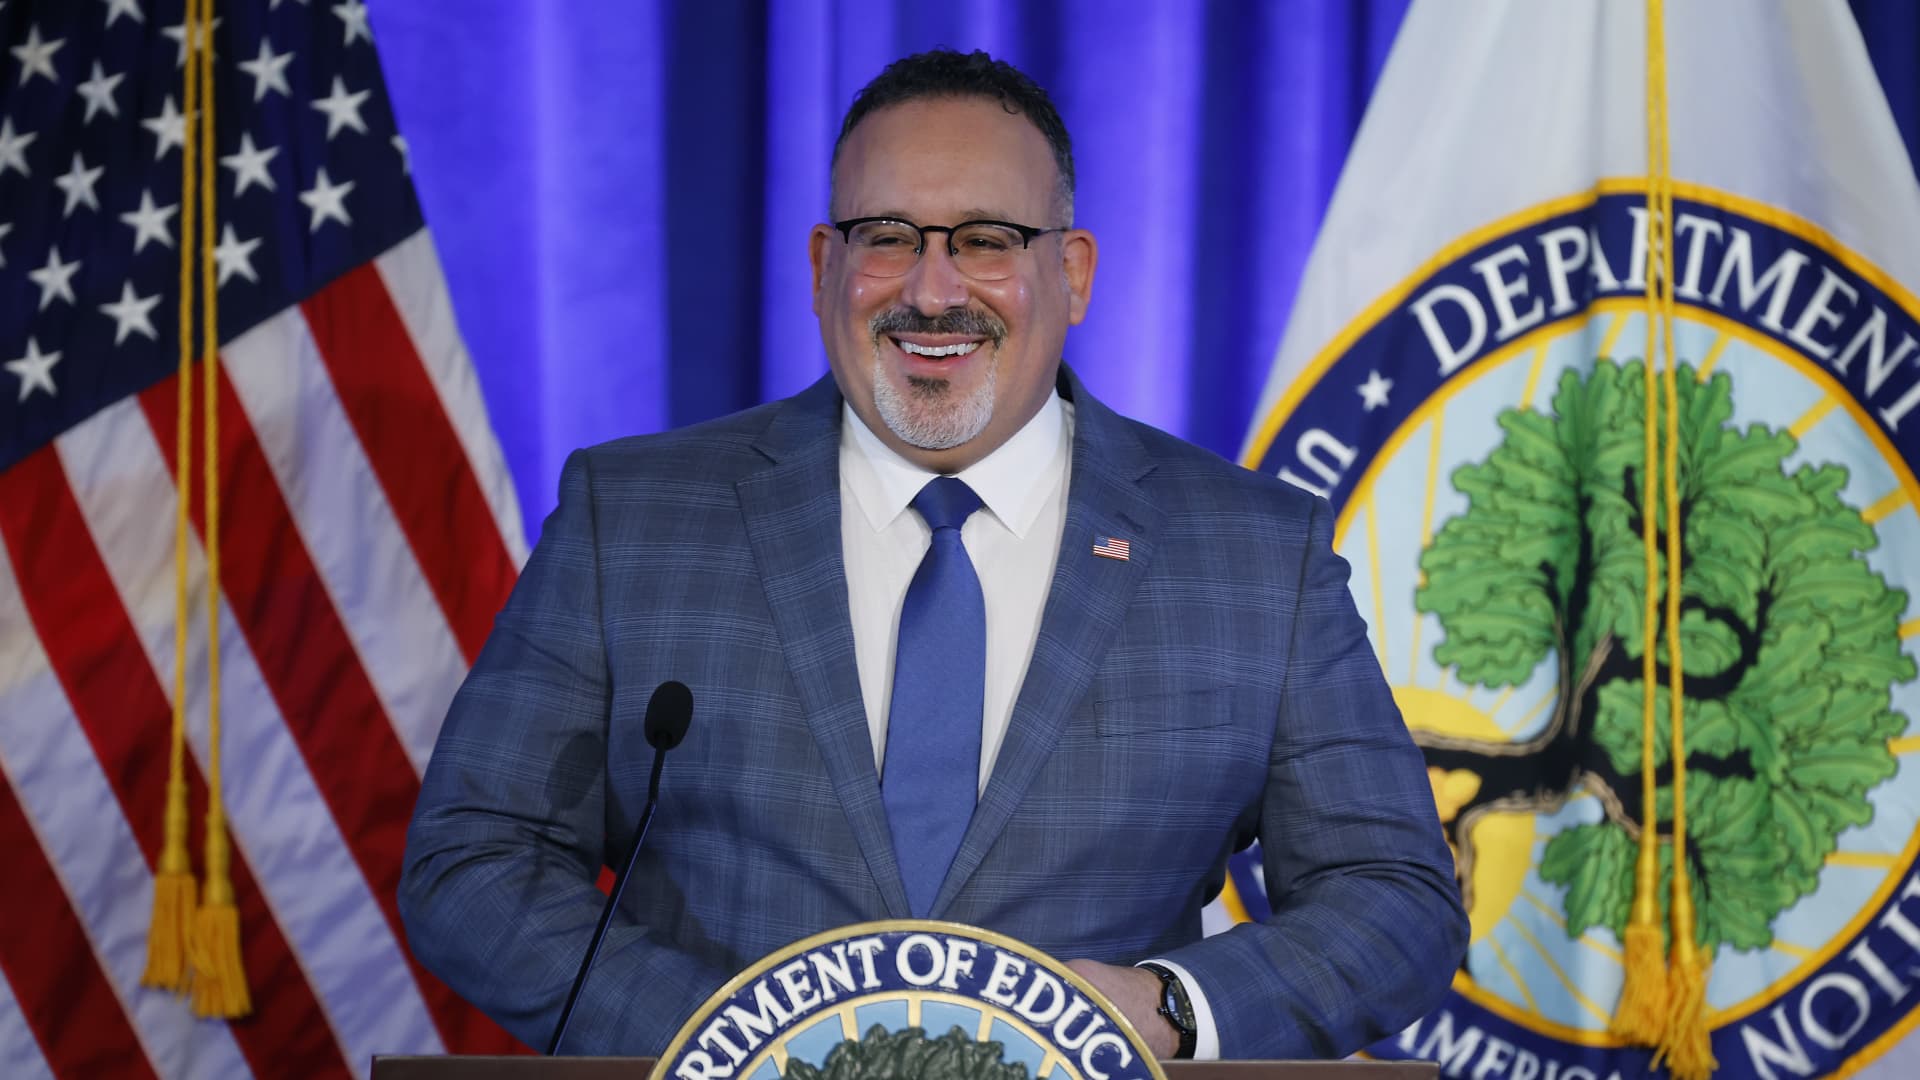 U.S. Education Secretary Miguel Cardona delivers remarks at the department's Lyndon Baines Johnson Building in Washington, D.C., on Jan. 27, 2022.